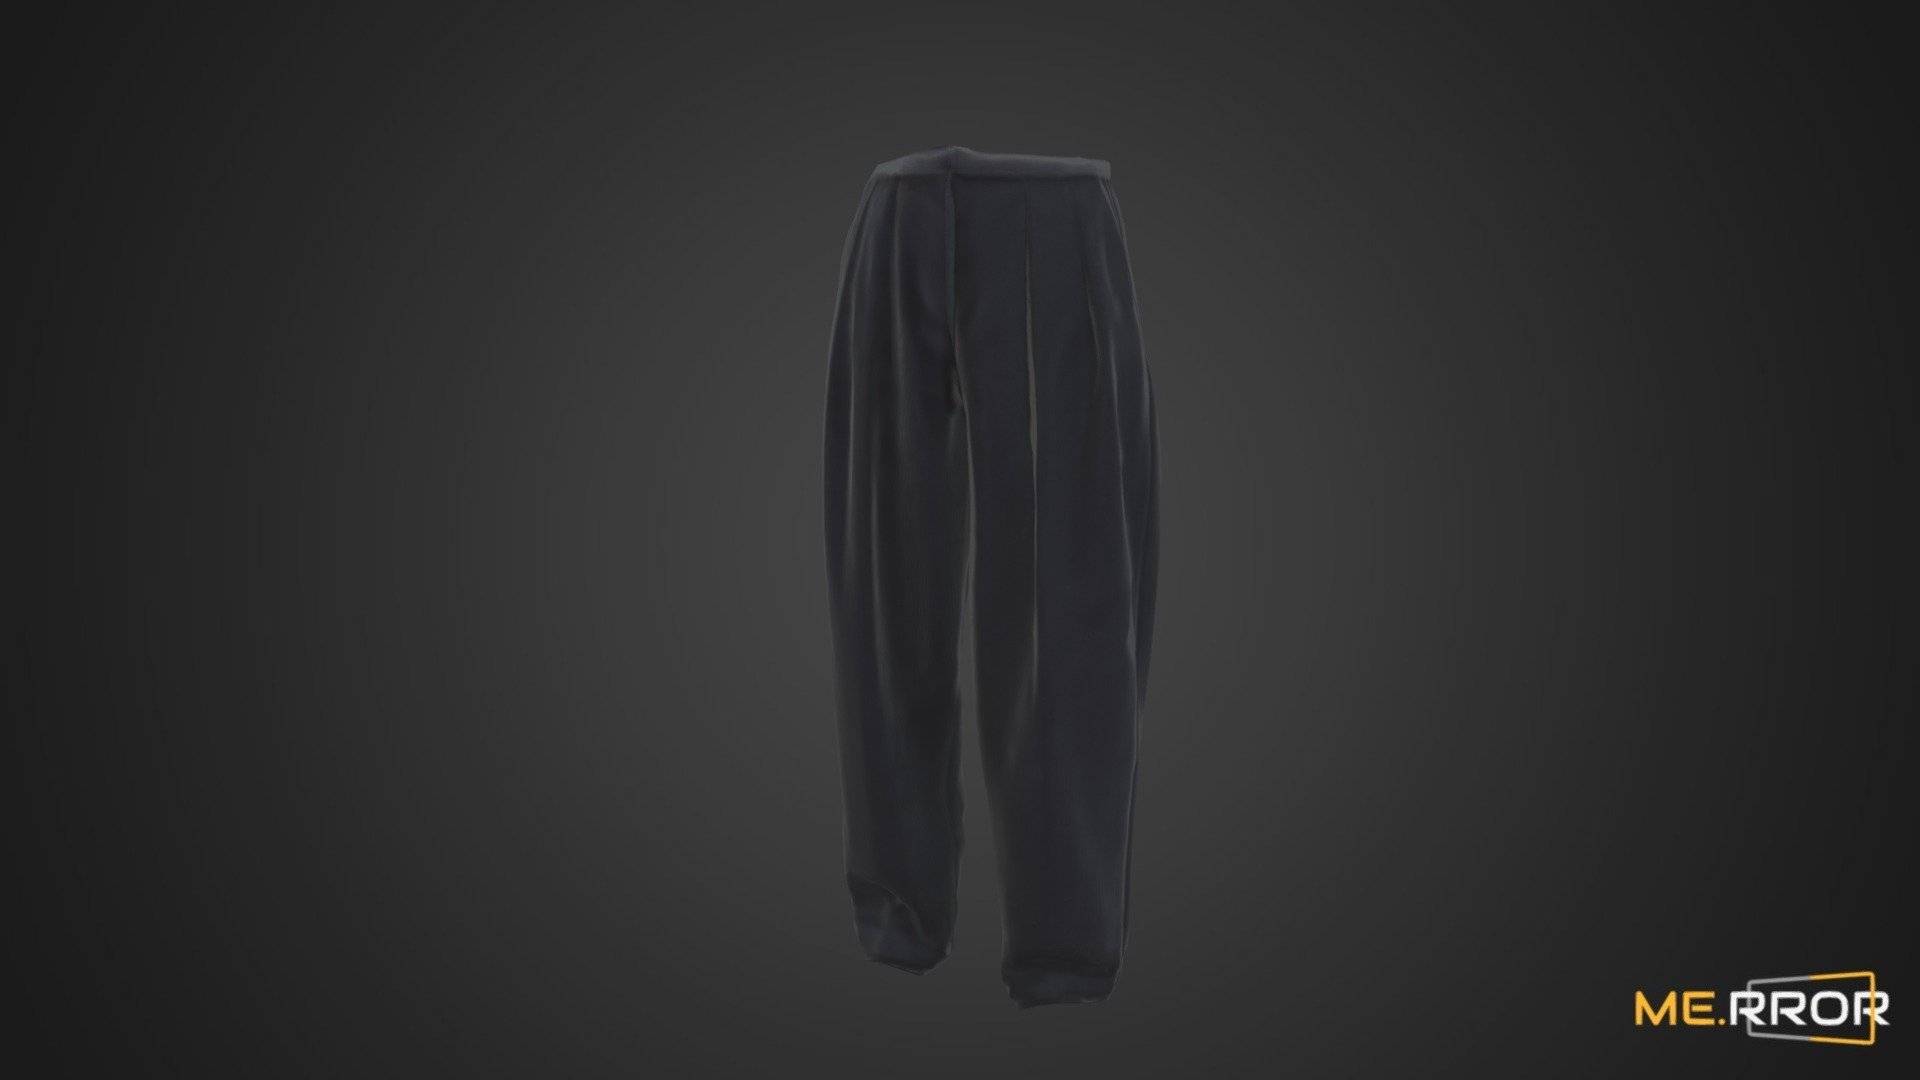 MERROR is a 3D Content PLATFORM which introduces various Asian assets to the 3D world


3DScanning #Photogrametry #ME.RROR - [Game-Ready] Black Slacks Pants - Buy Royalty Free 3D model by ME.RROR Studio (@merror) 3d model